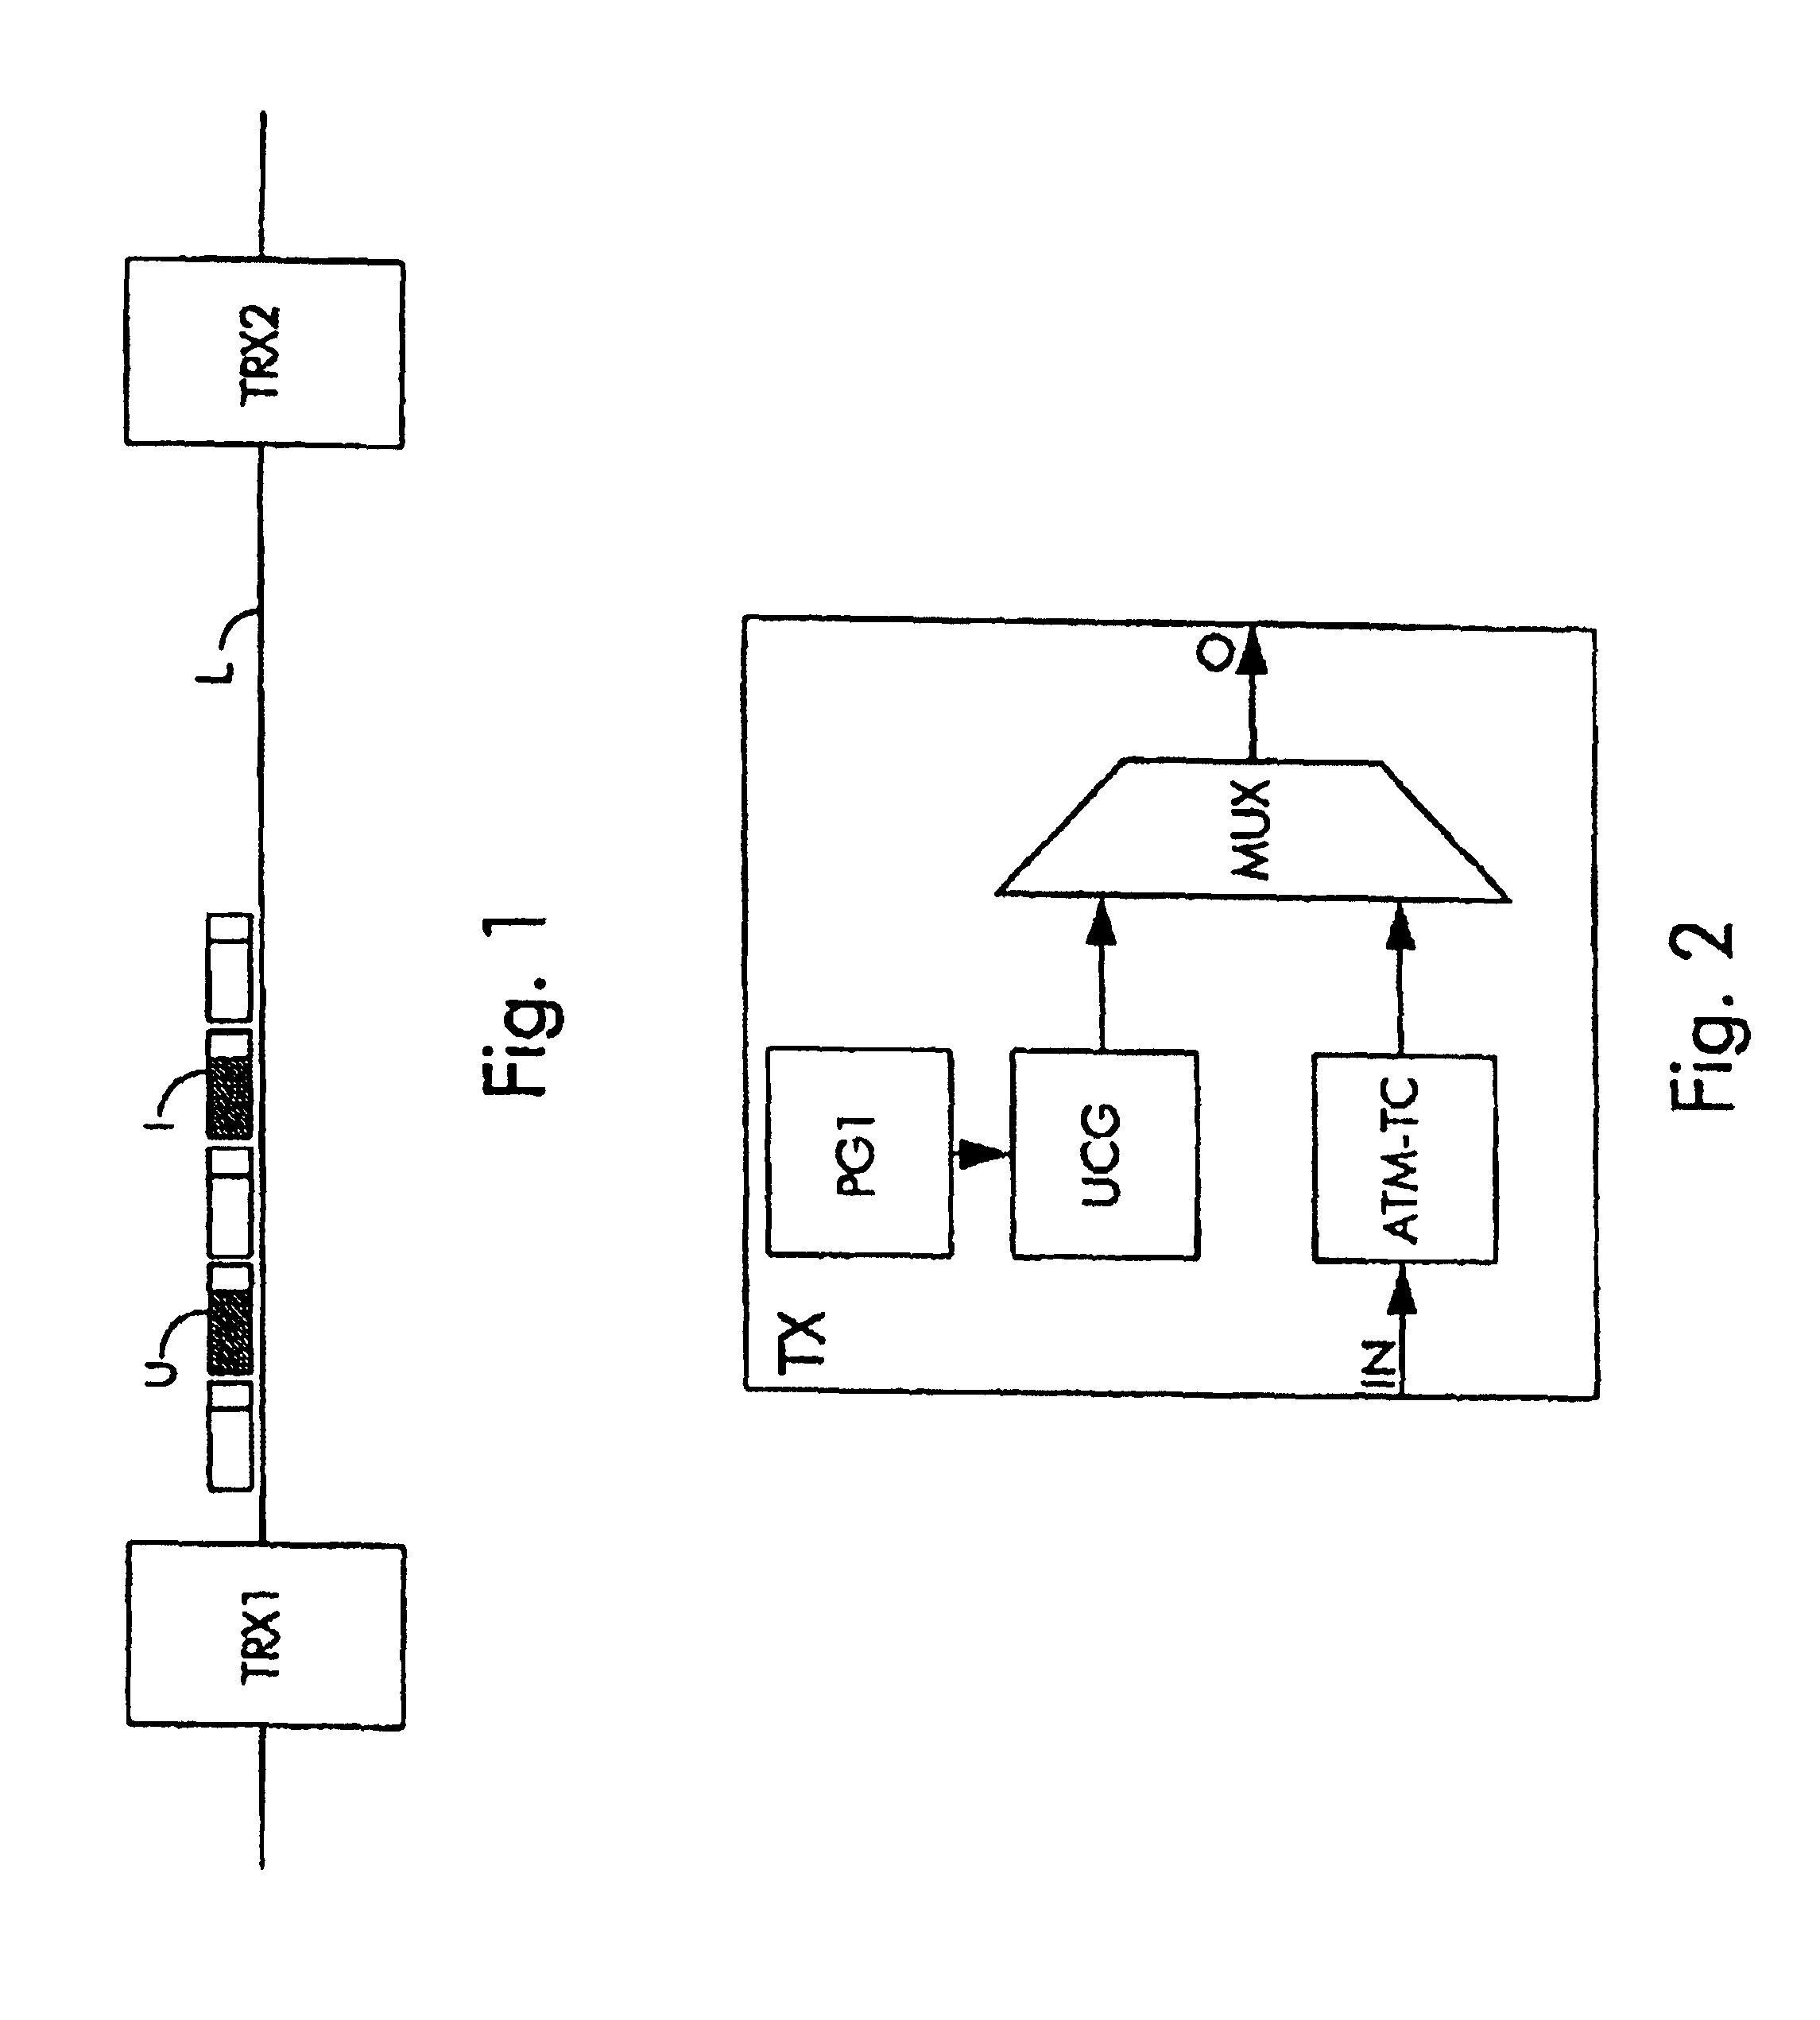 Method for bit error rate measurements in a cell-based telecommunication system